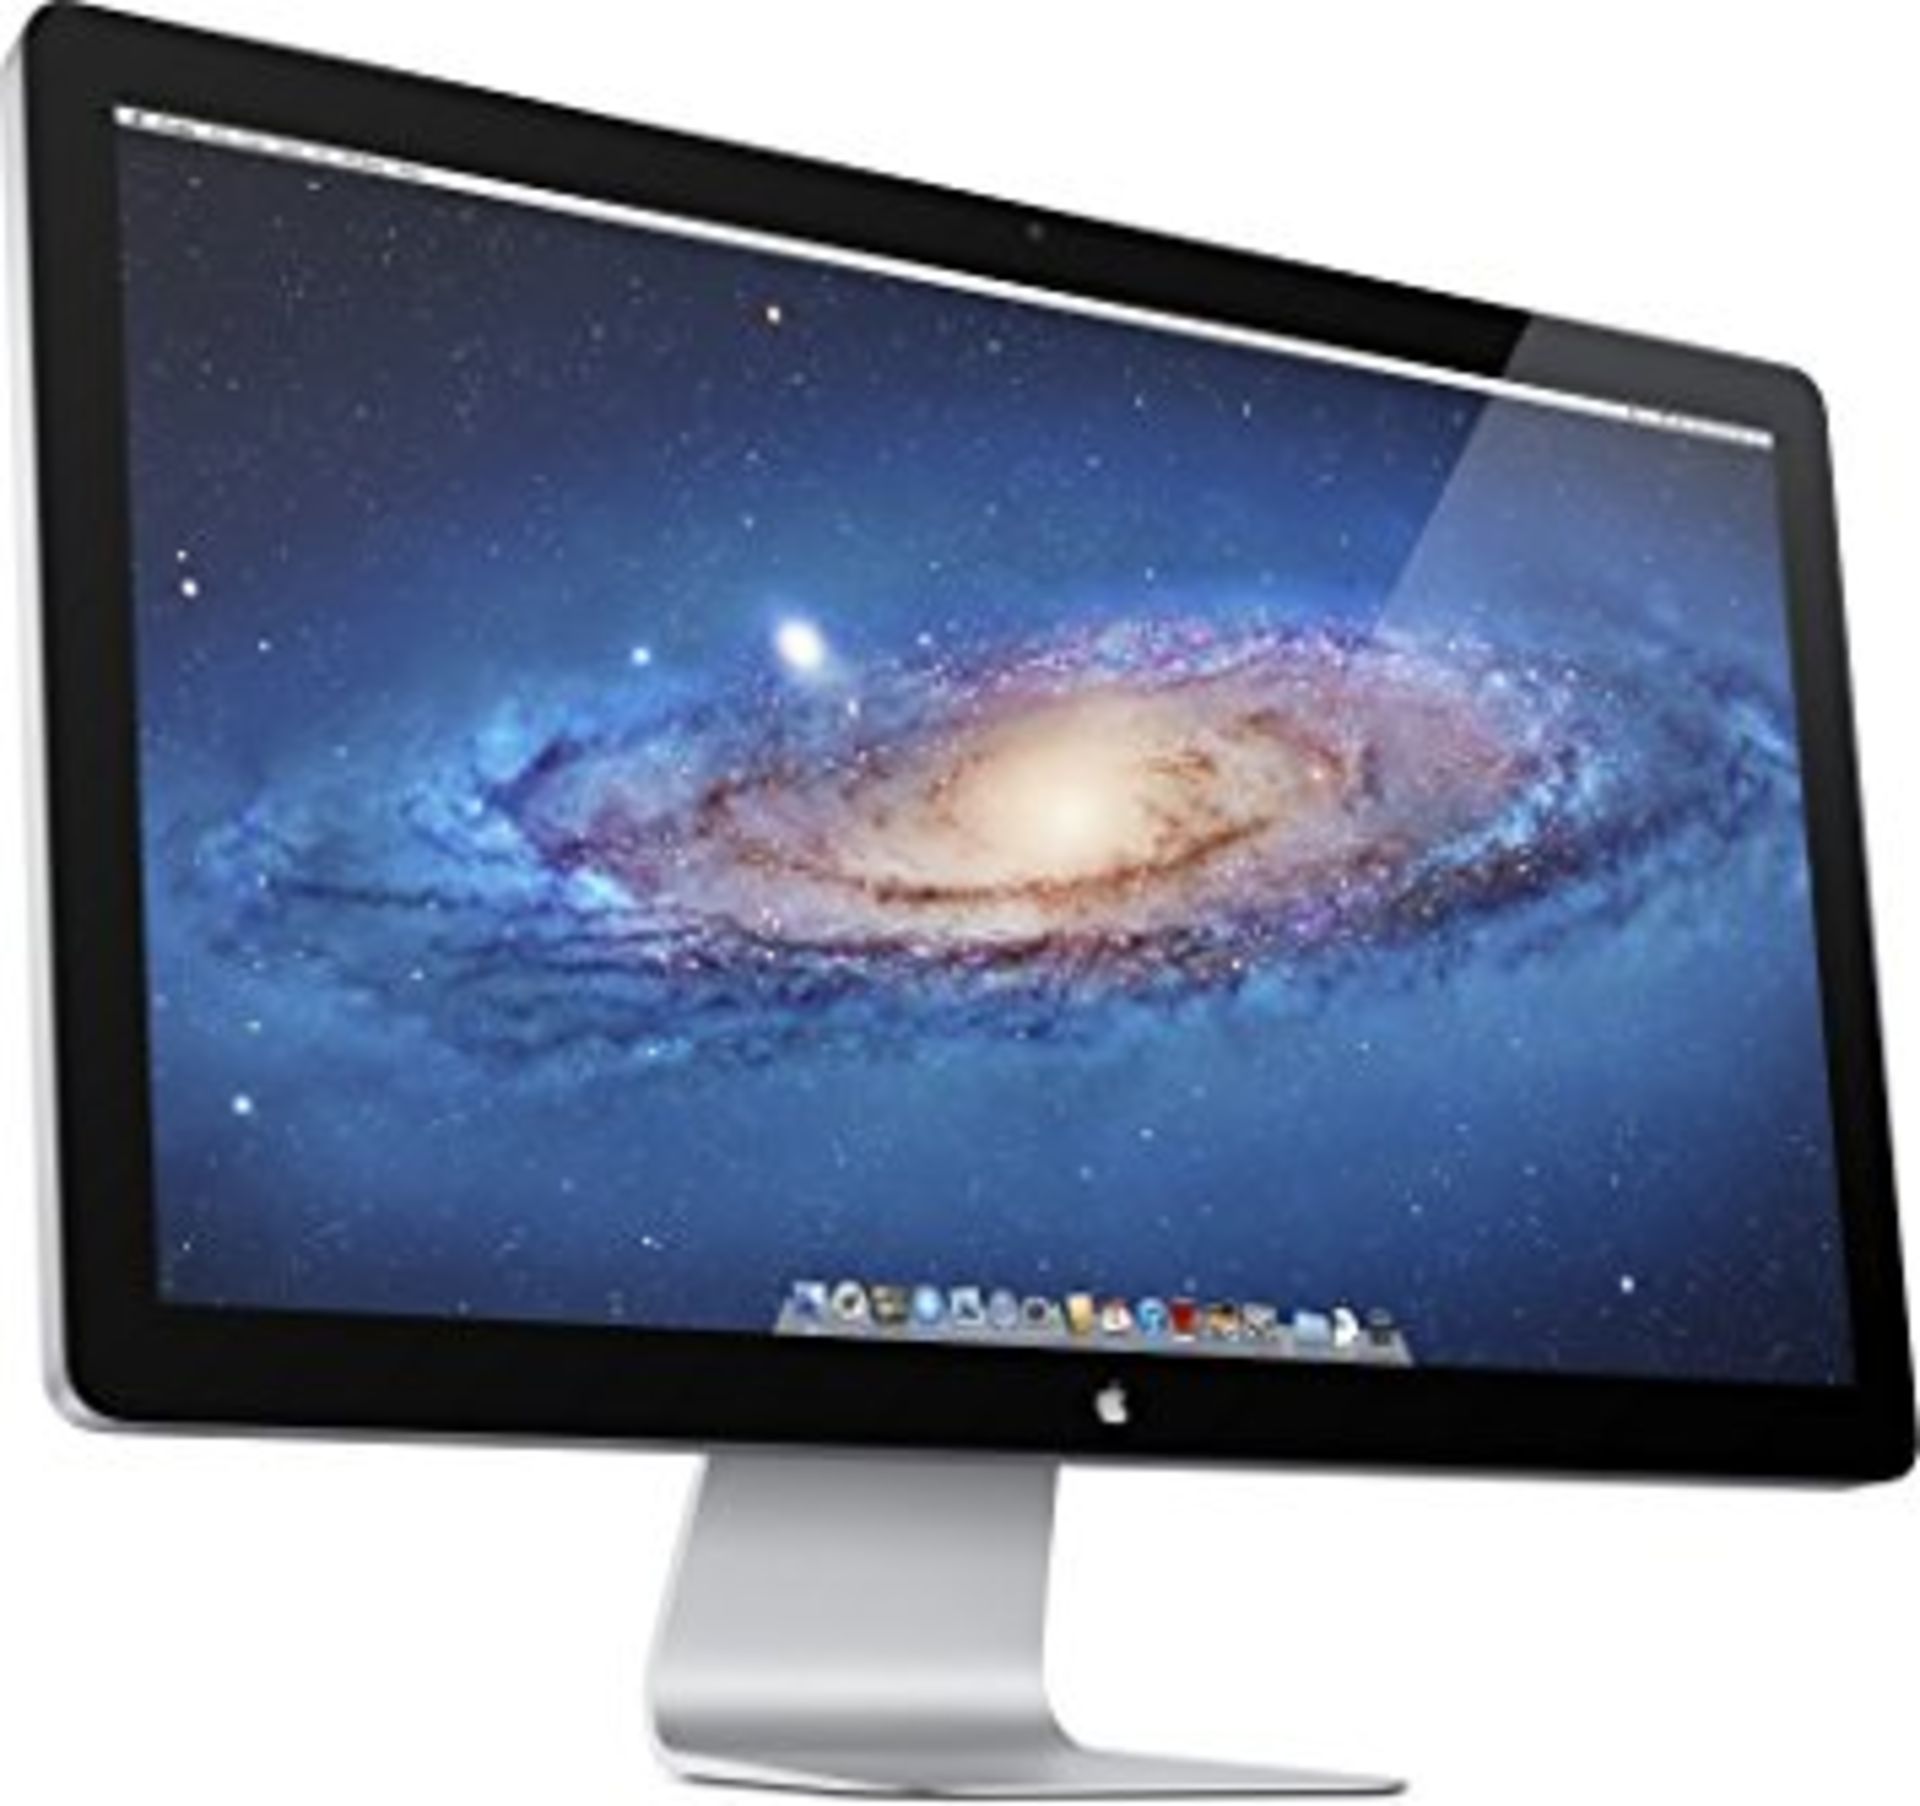 V Grade B Apple A1407 27 Inch IPS Thunderbolt Display - ISP £659.00 (Amazon) - Available 6 Working